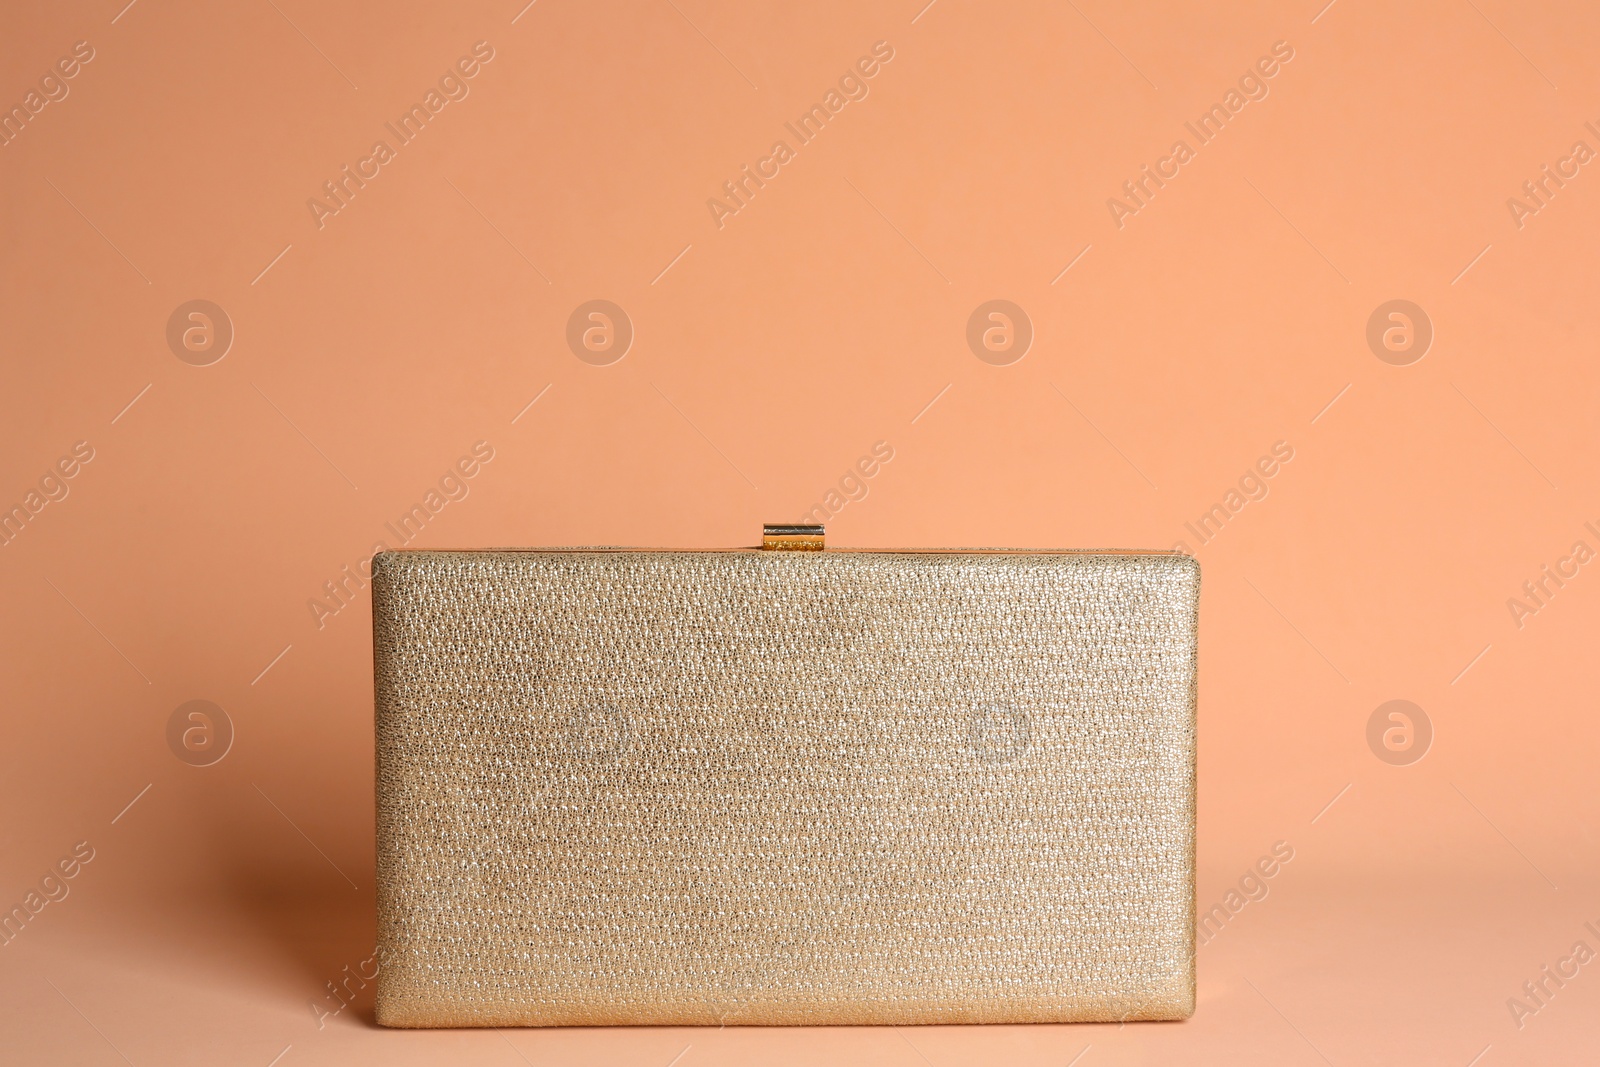 Photo of Golden stylish woman's bag on pale pink background